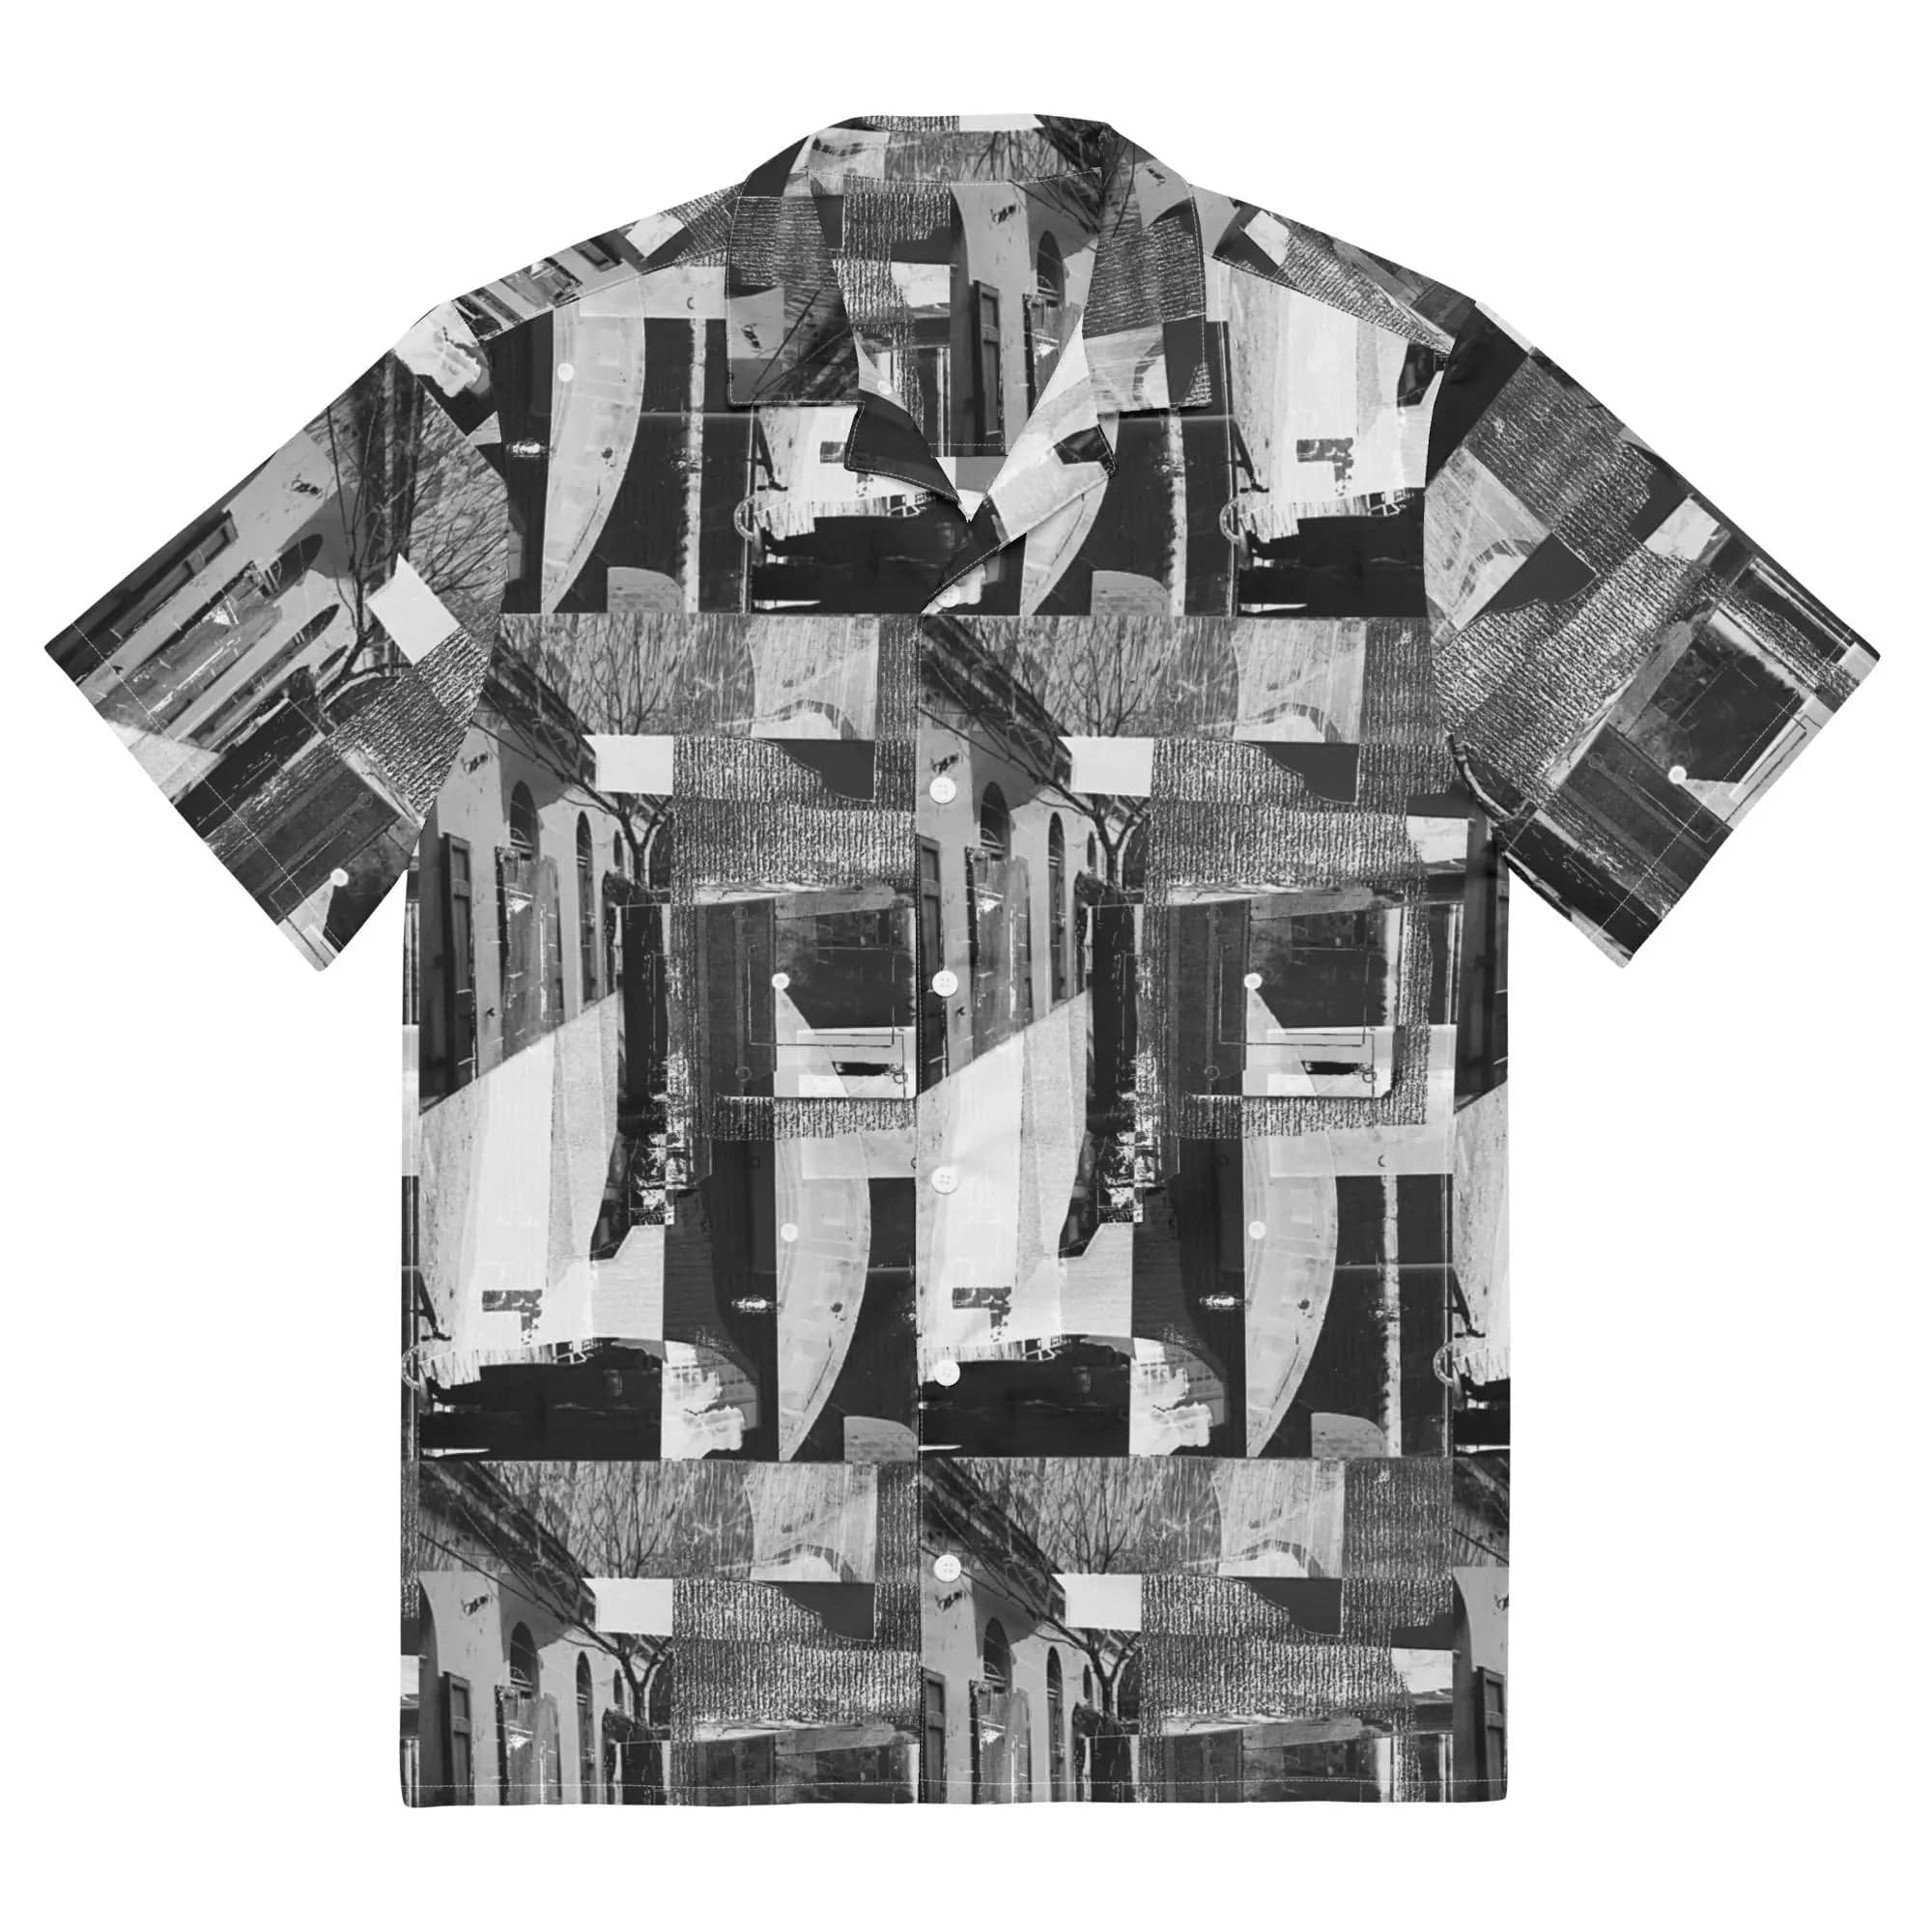 all-over-print-unisex-button-shirt-white-front-64c02c710f98c-10405894.jpg